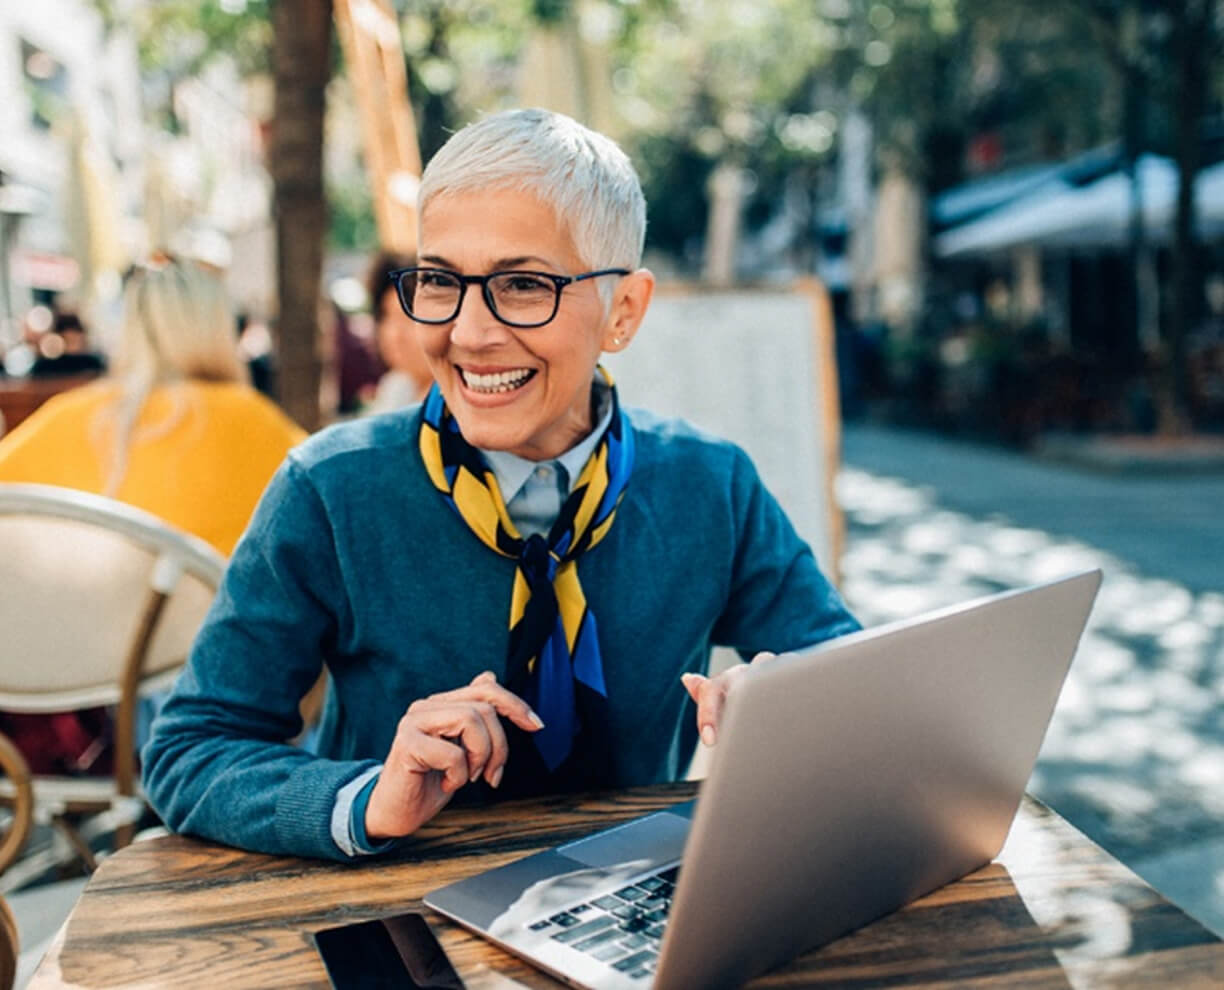 Smiling woman using a laptop in an outdoor cafe ACAP Careers culture